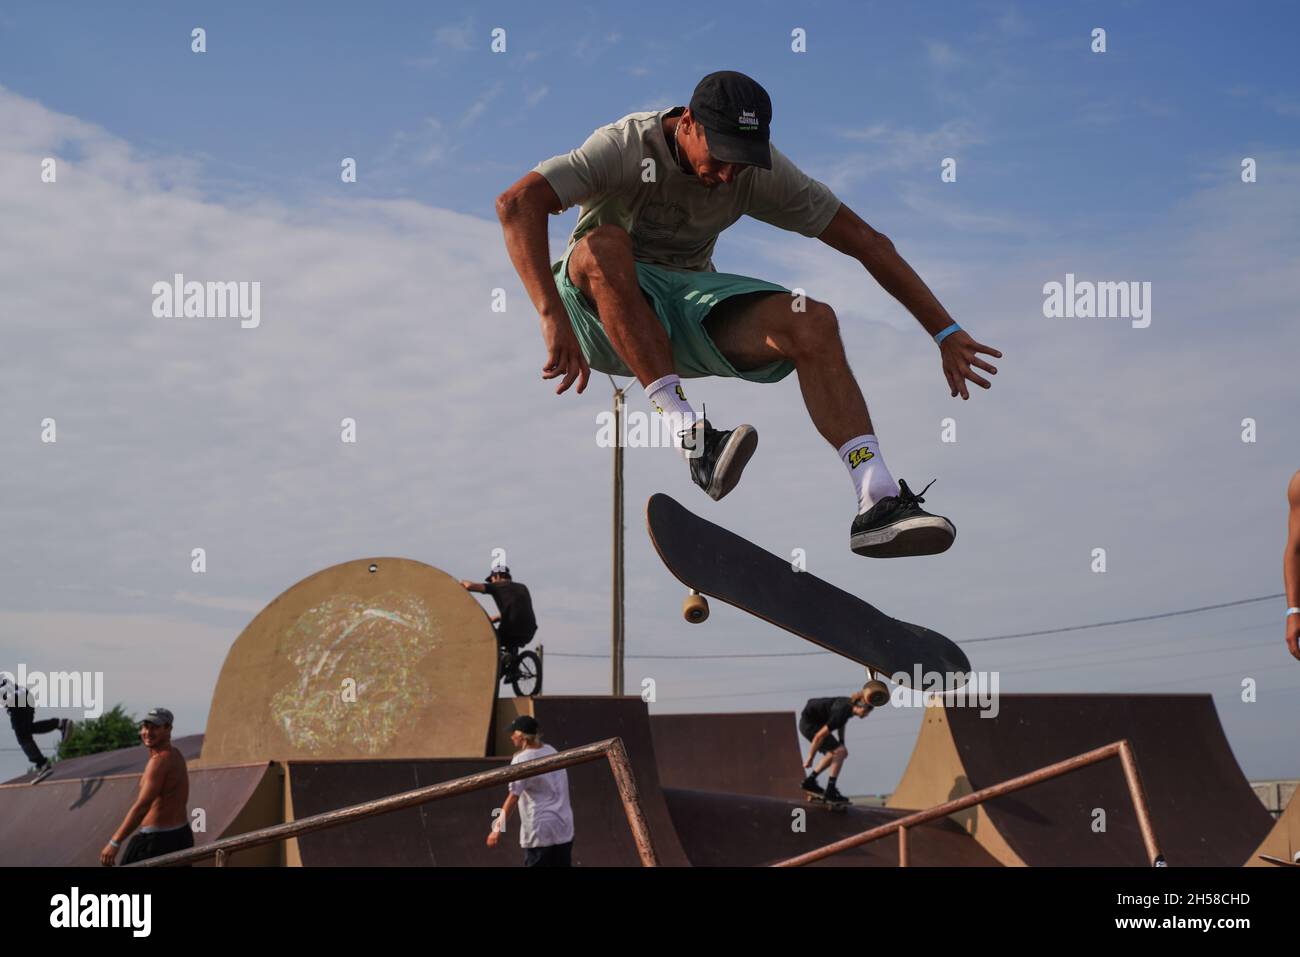 A Skate Bowl High Resolution Stock Photography and Images - Alamy